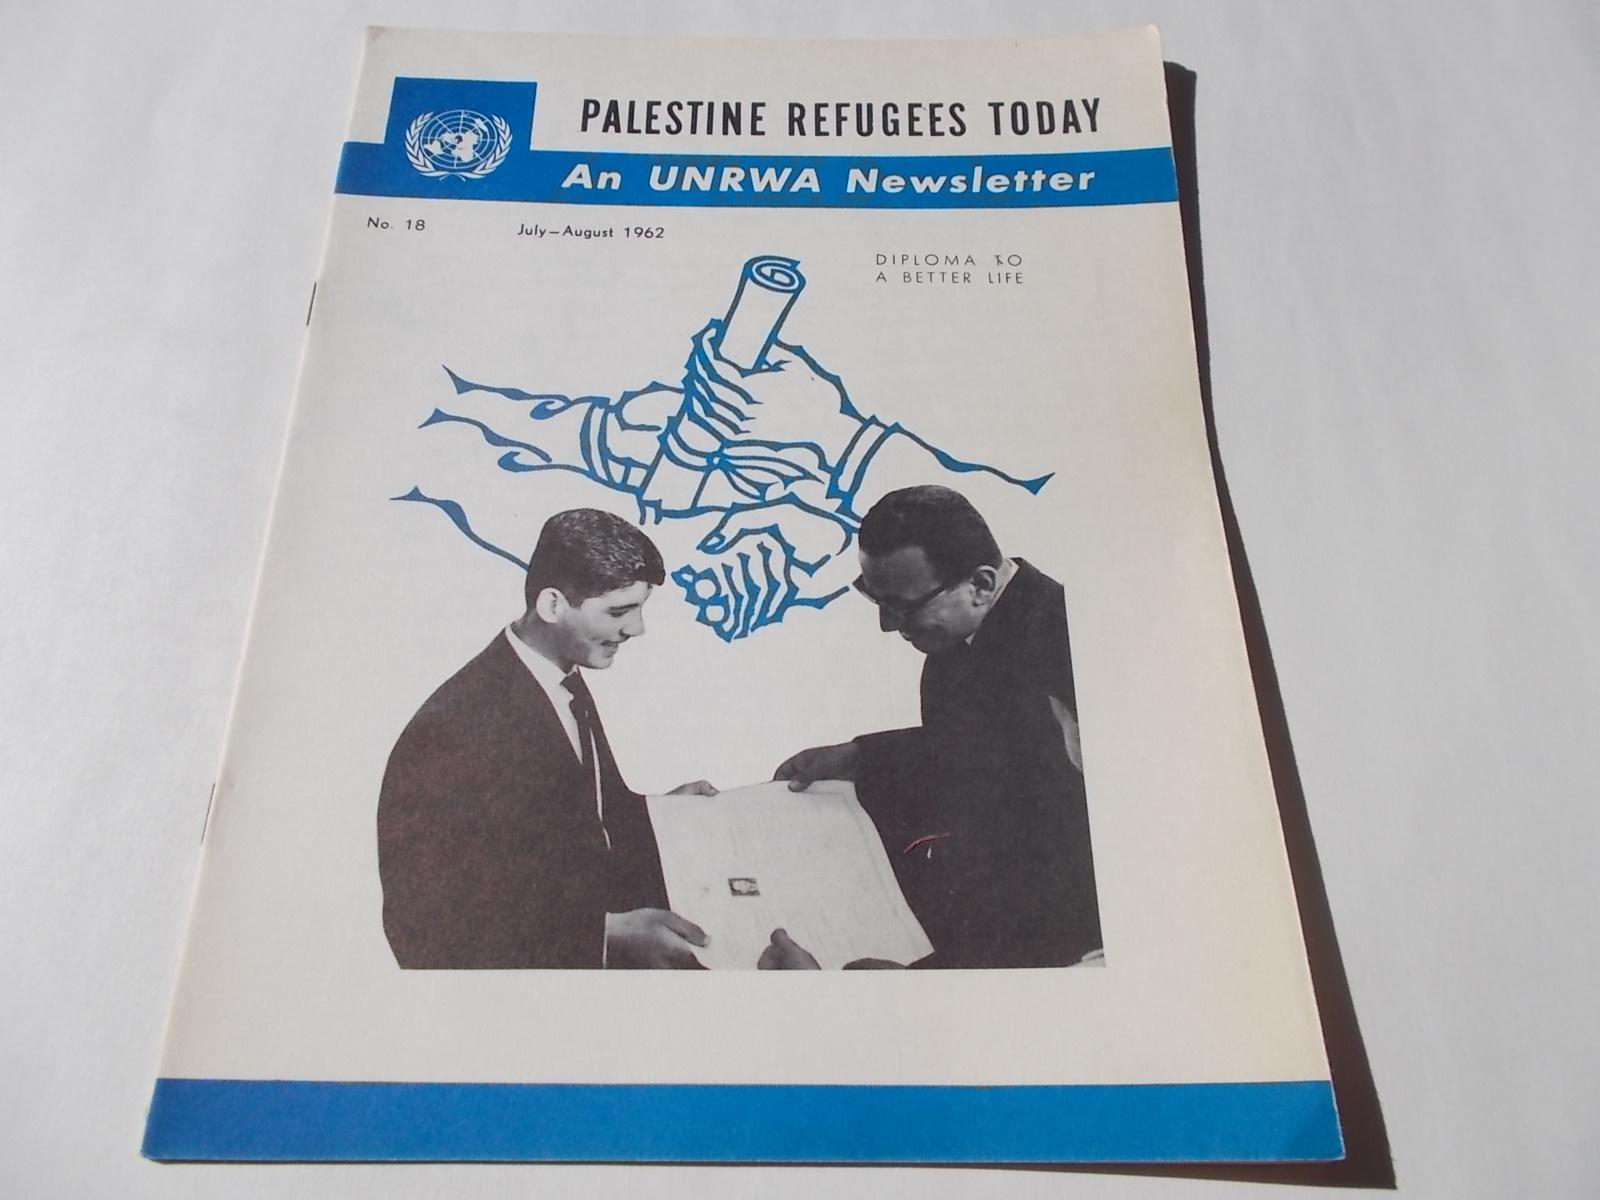 palestine-refugees-today-an-unrwa-newsletter-no-18-july-august-1962